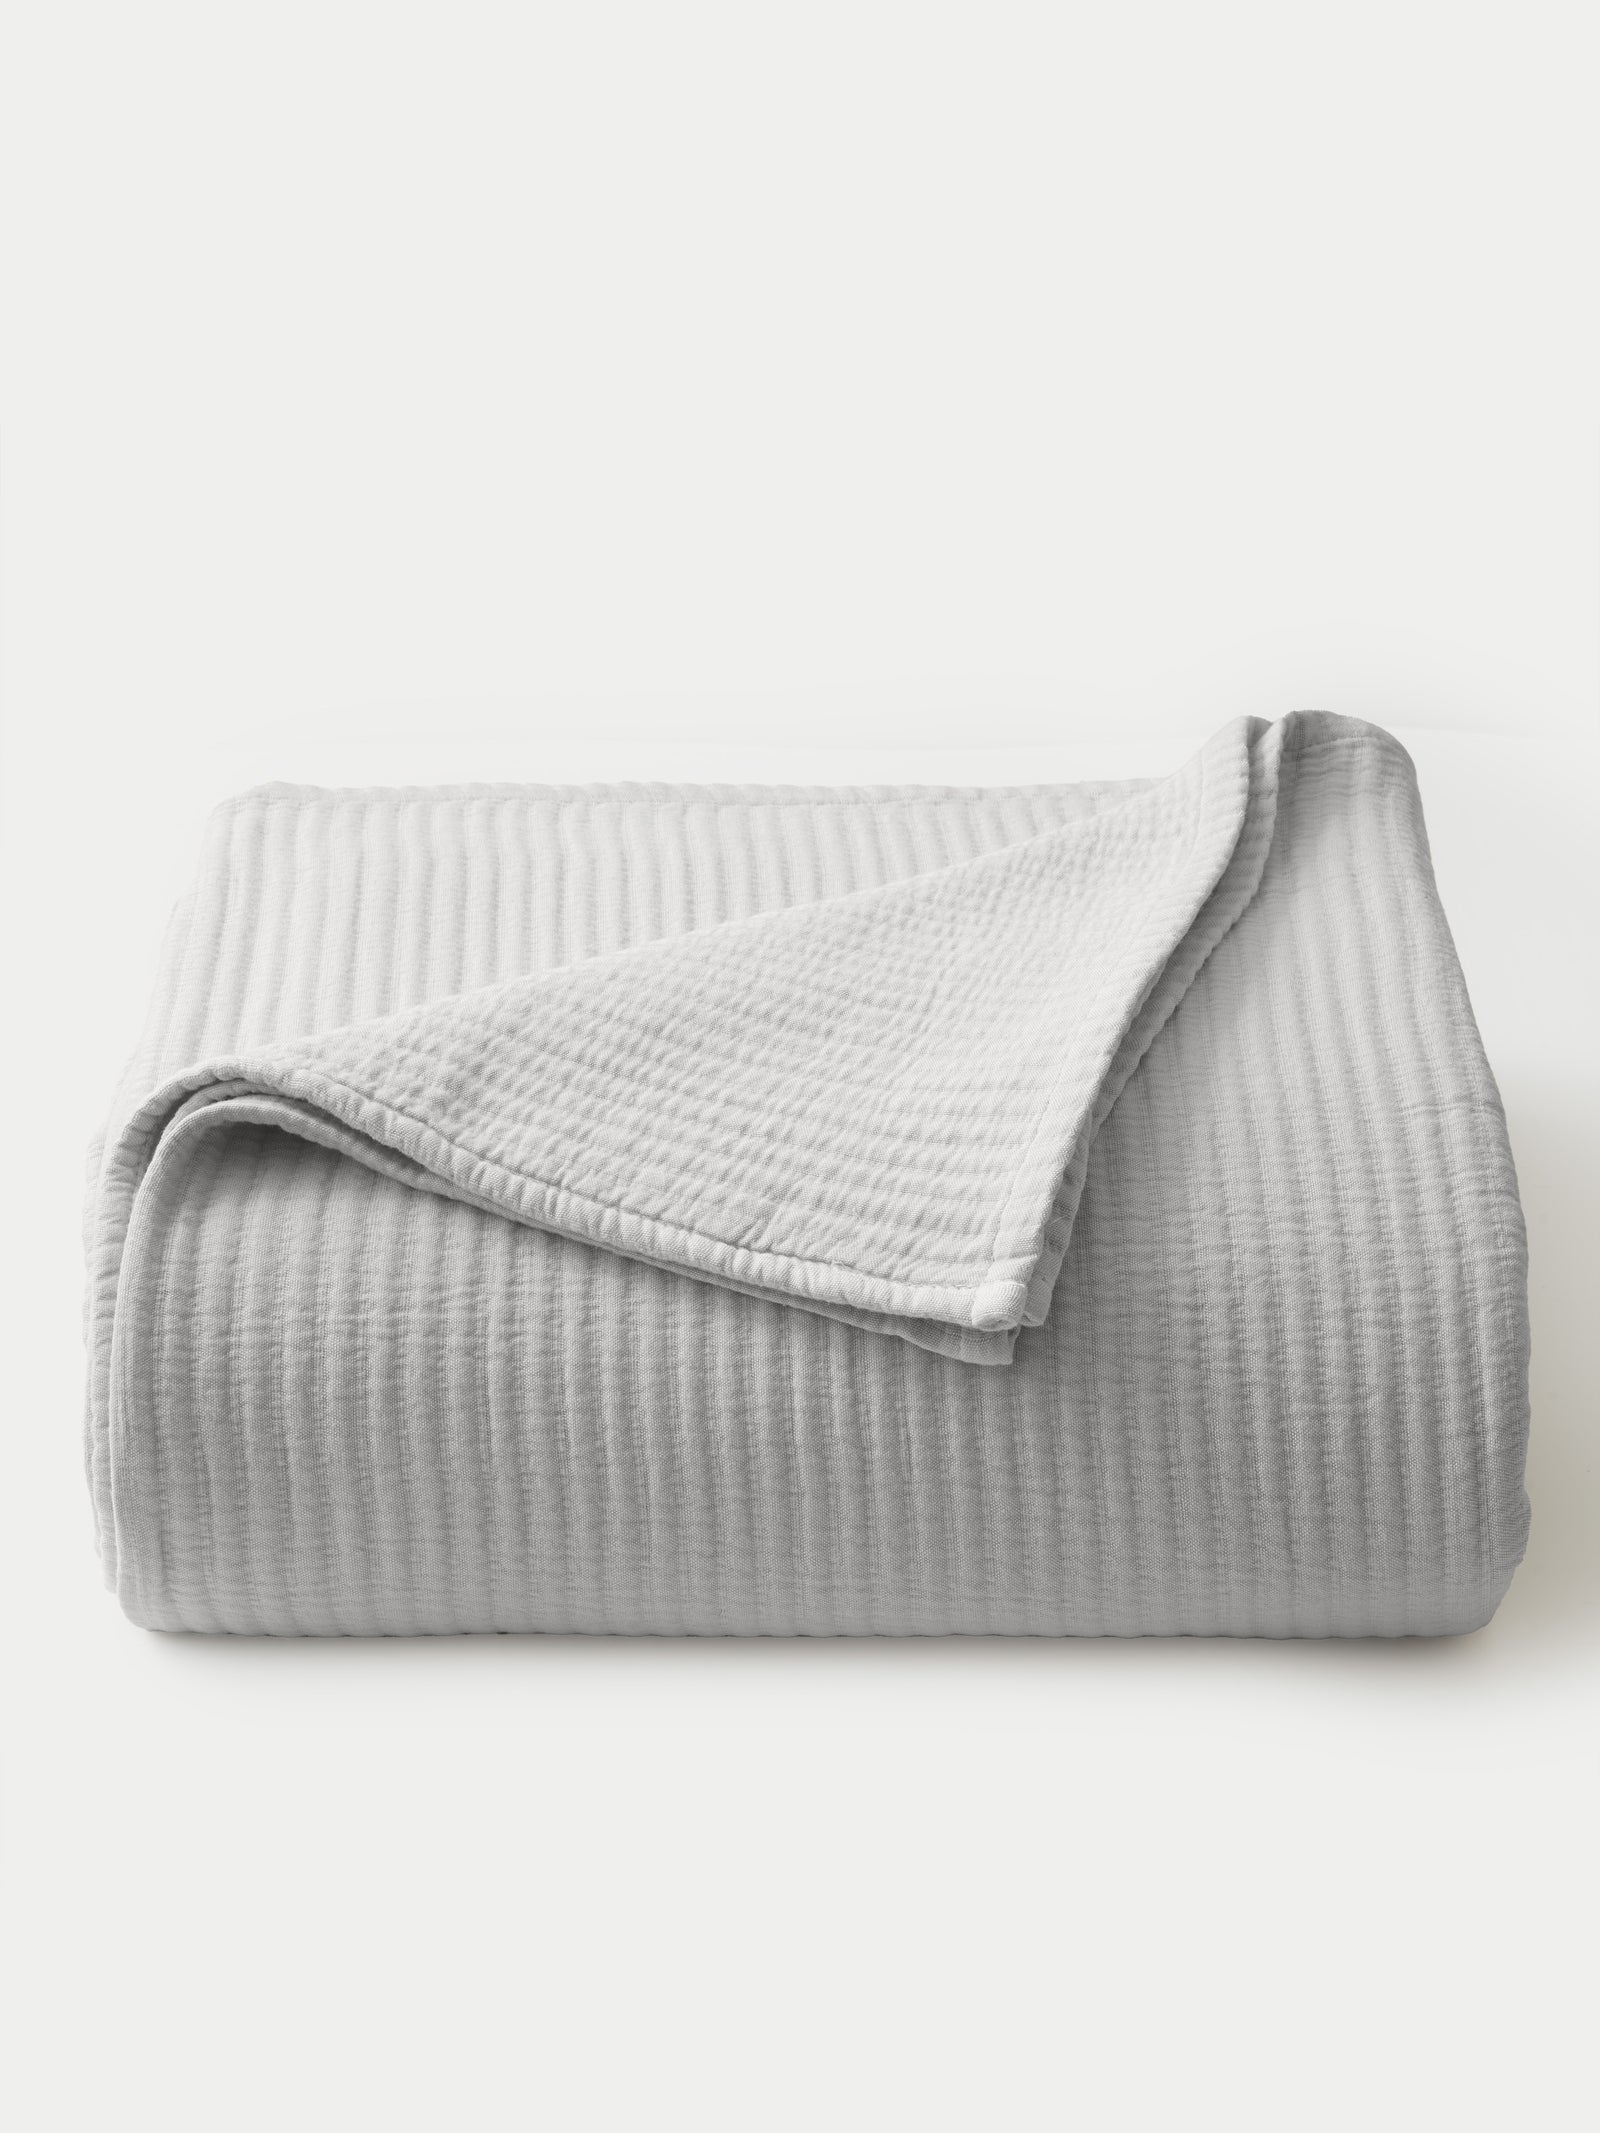 Light Grey coverlet folded with white background 